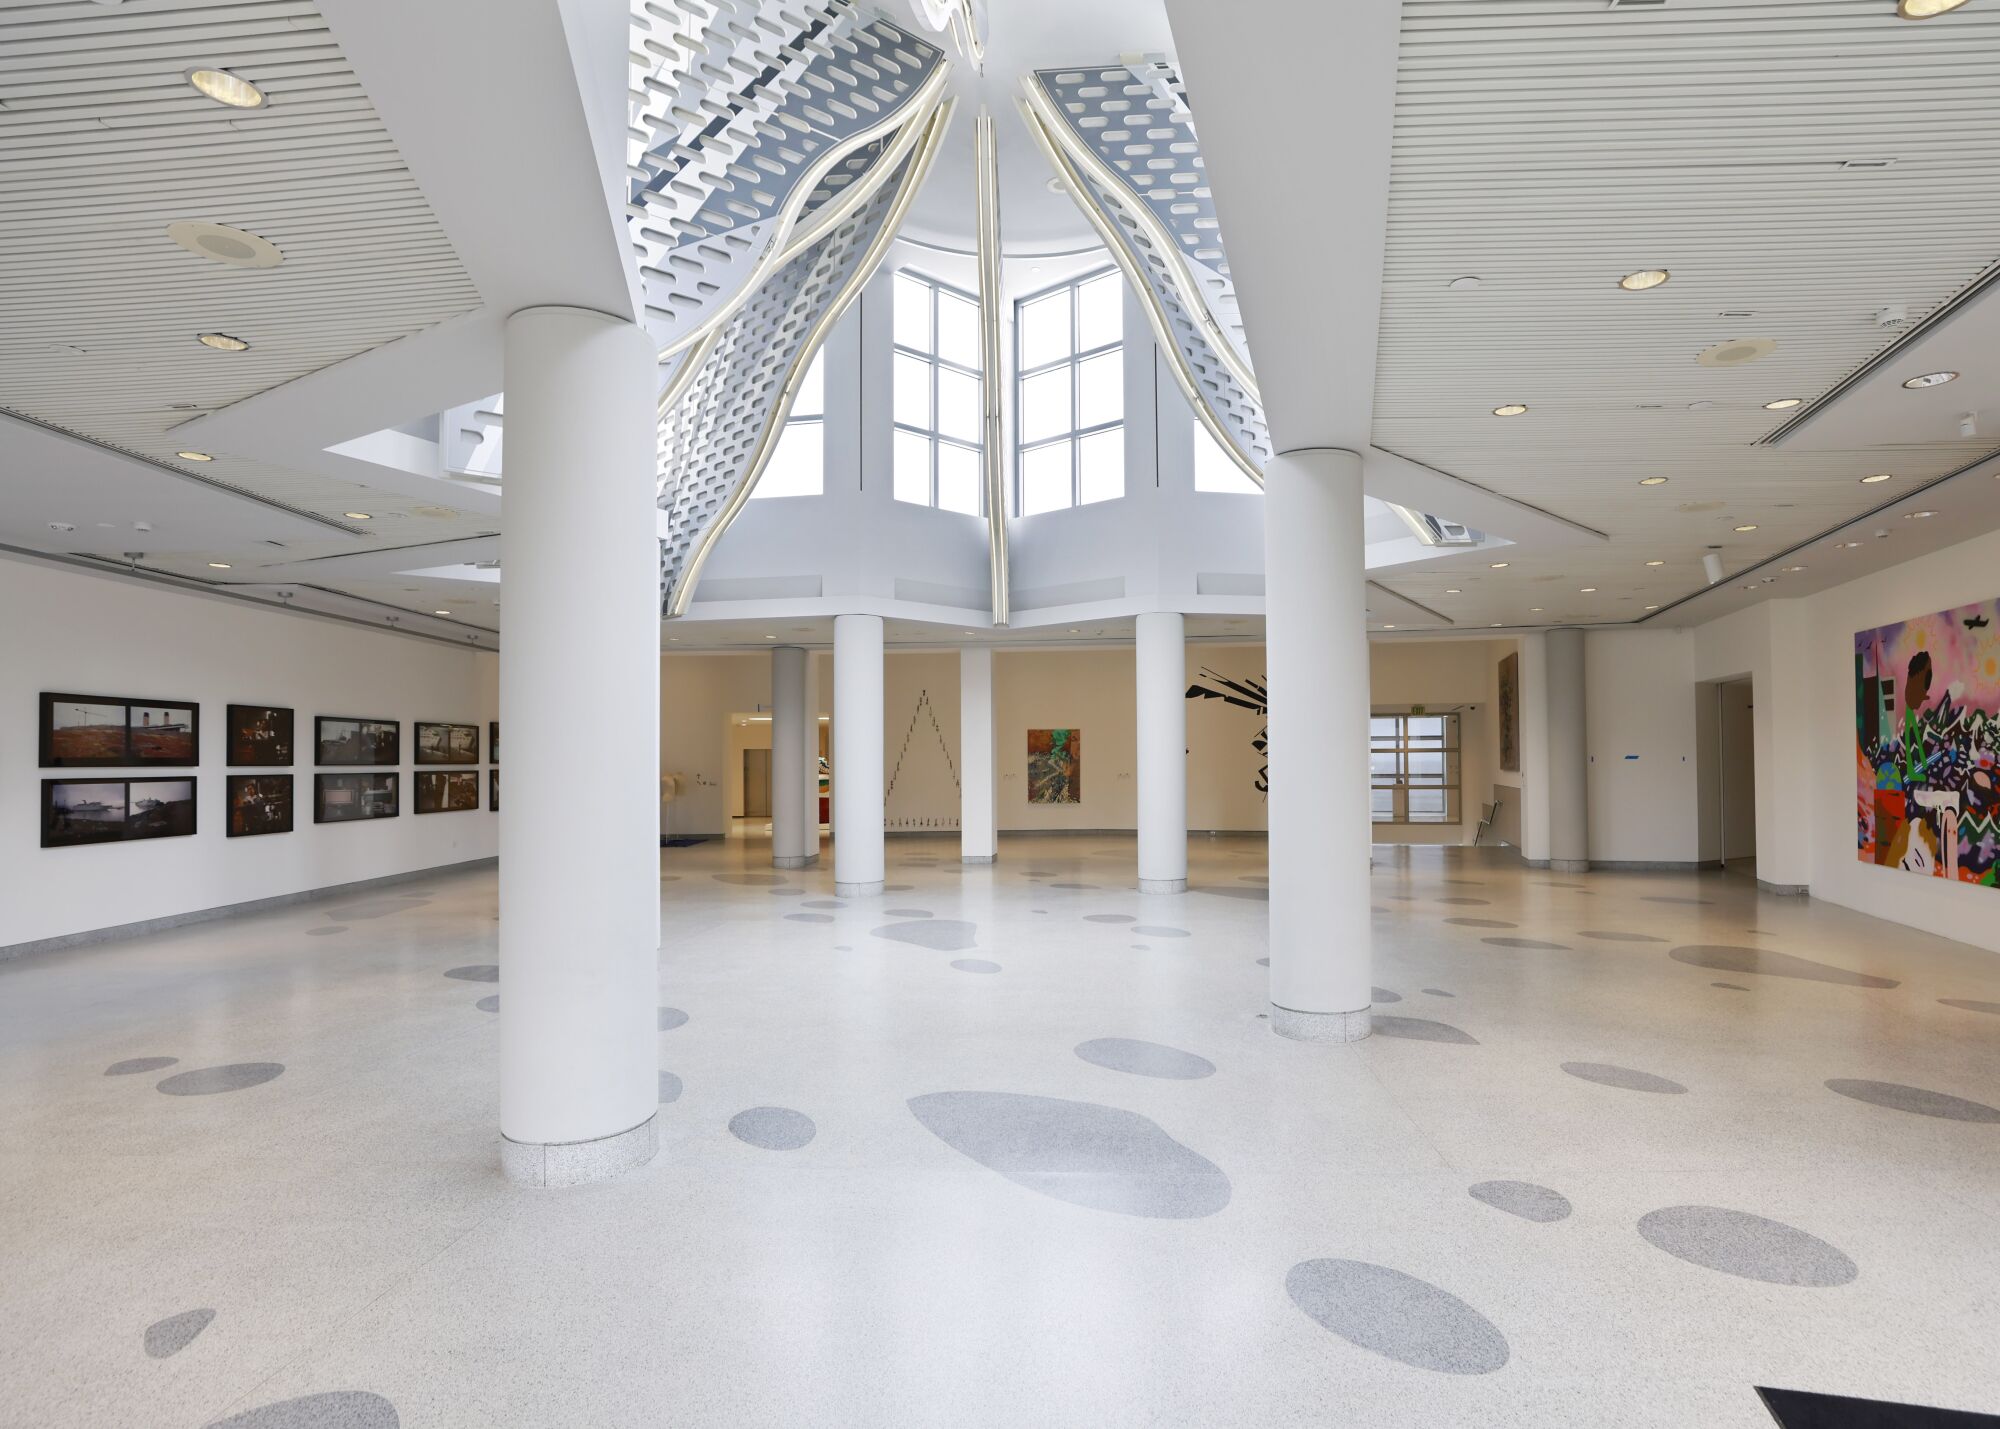 A light-filled atrium with paintings on the walls 